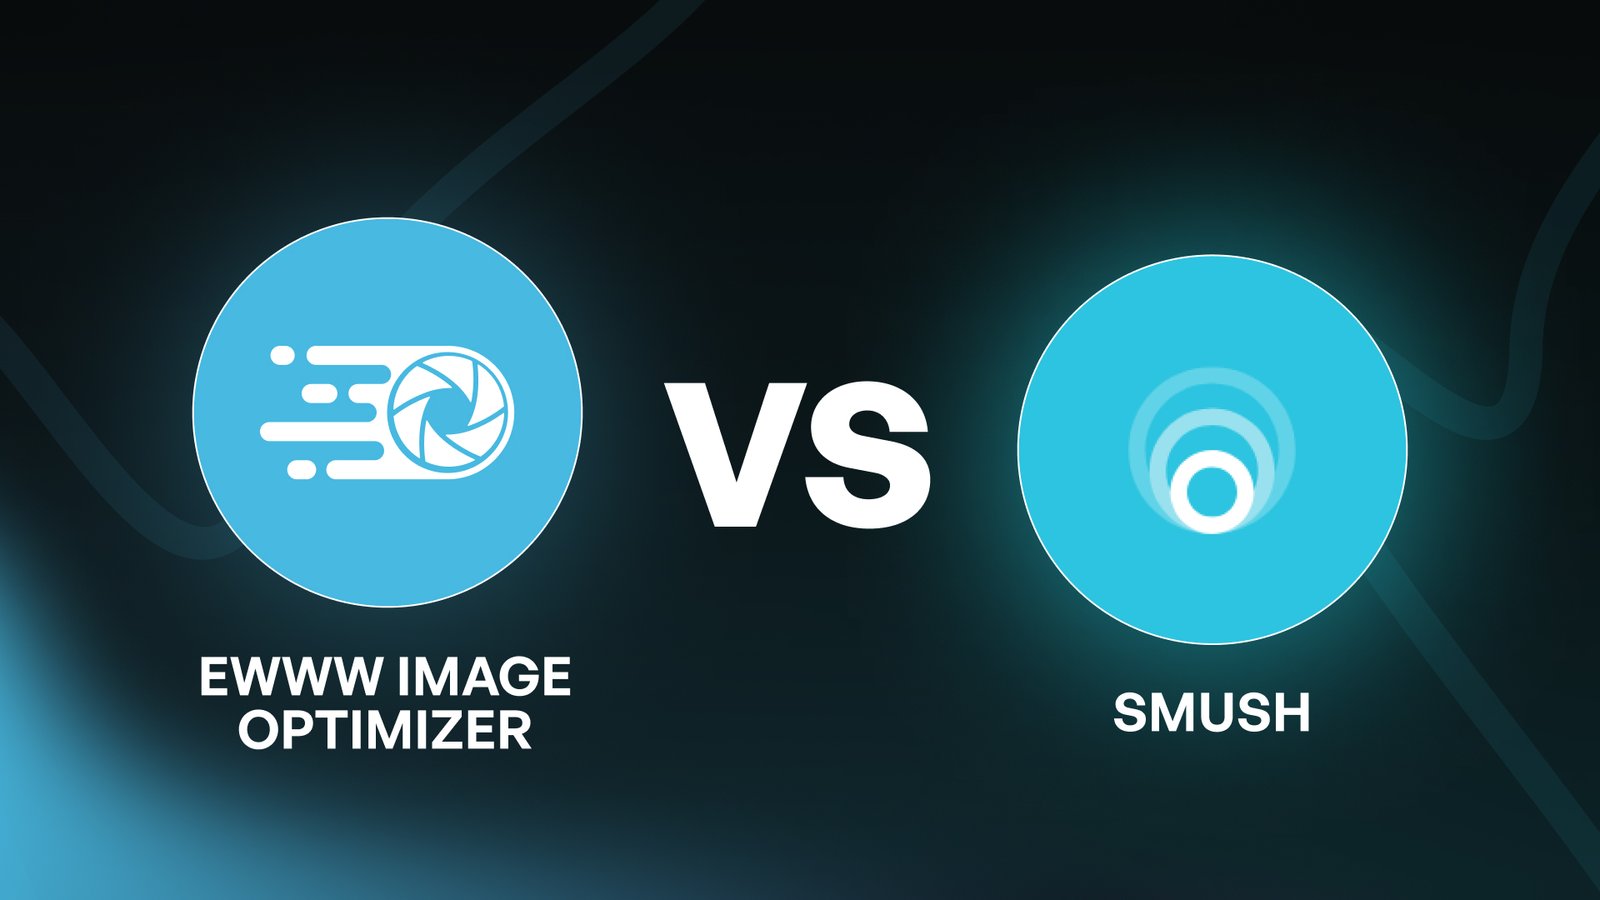 Comparation between EWWW Image Optimizer and Smush with logo.